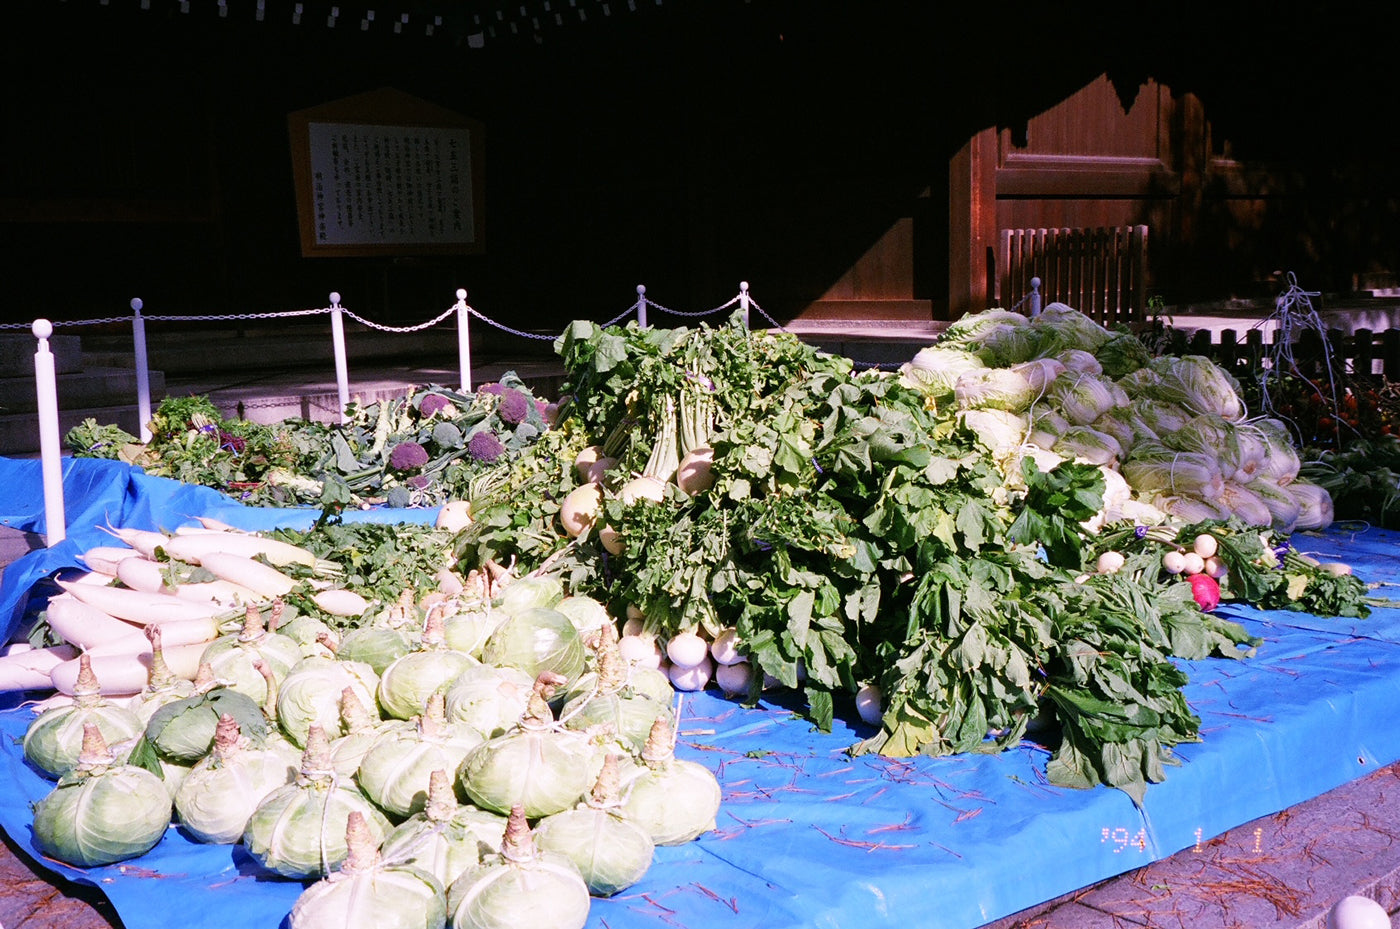 Photograph of vegetables sitting on a table in Tokyo